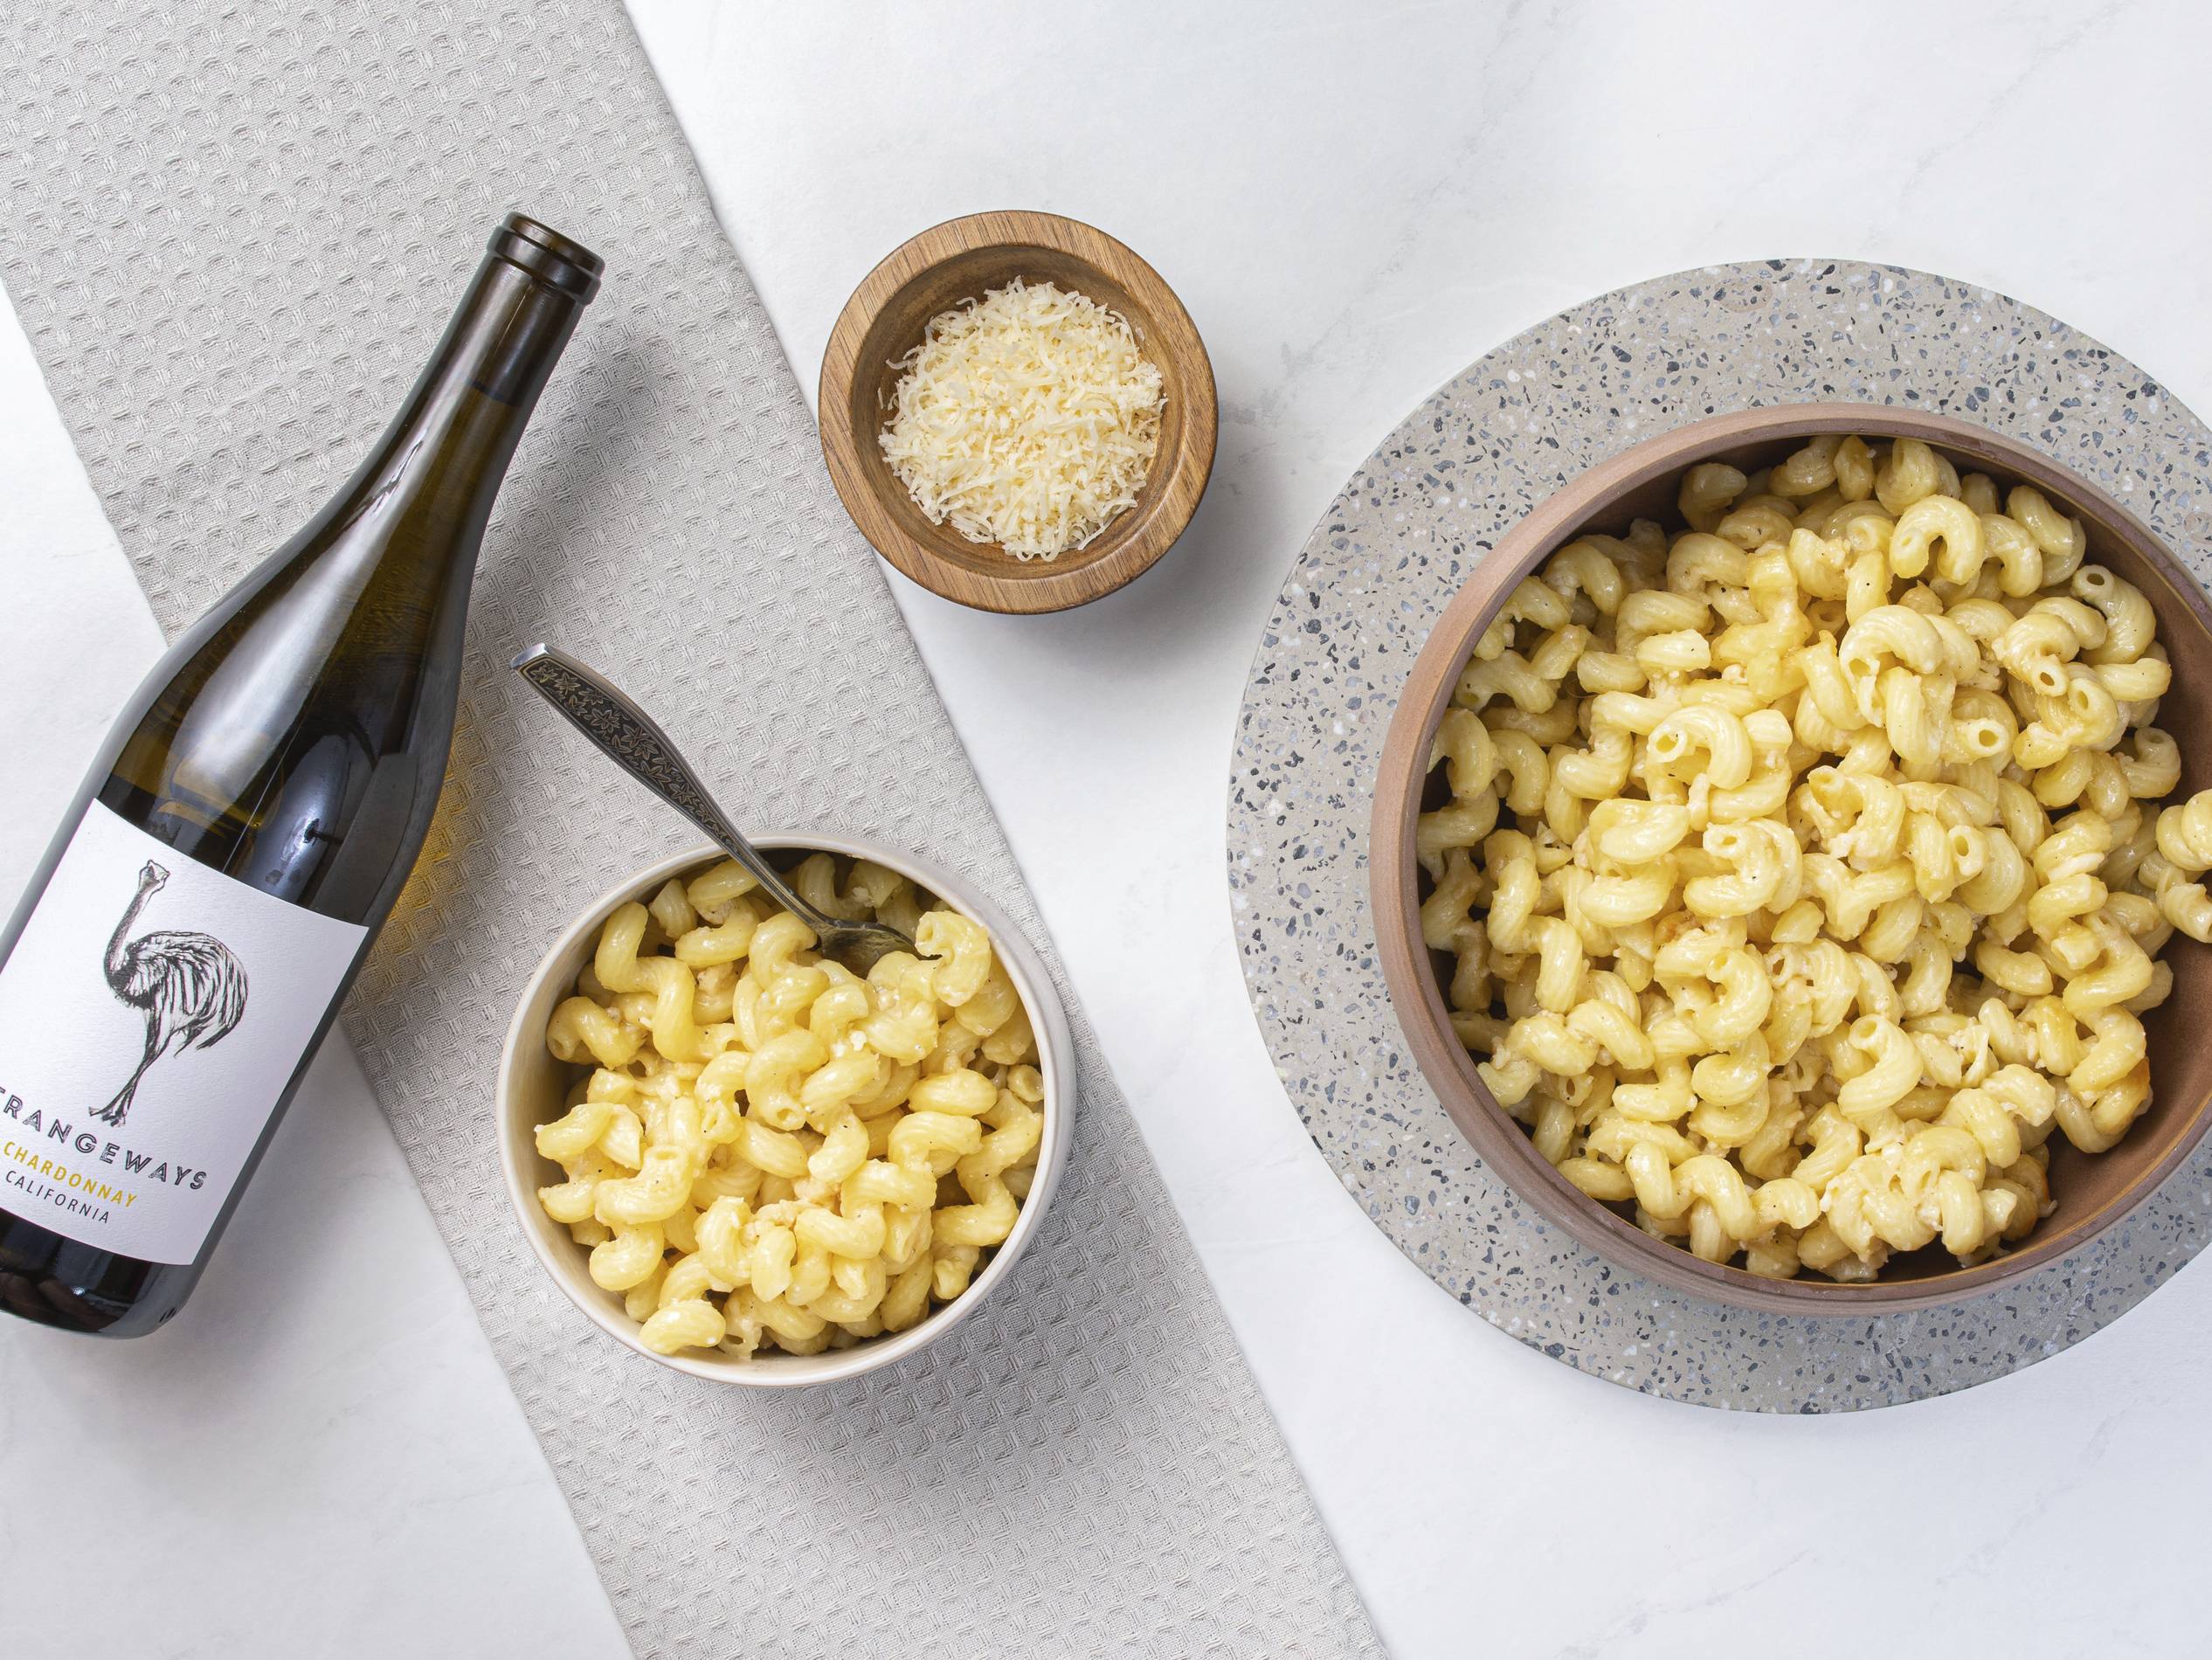 Foxtrot Adult Mac and Cheese Pairing